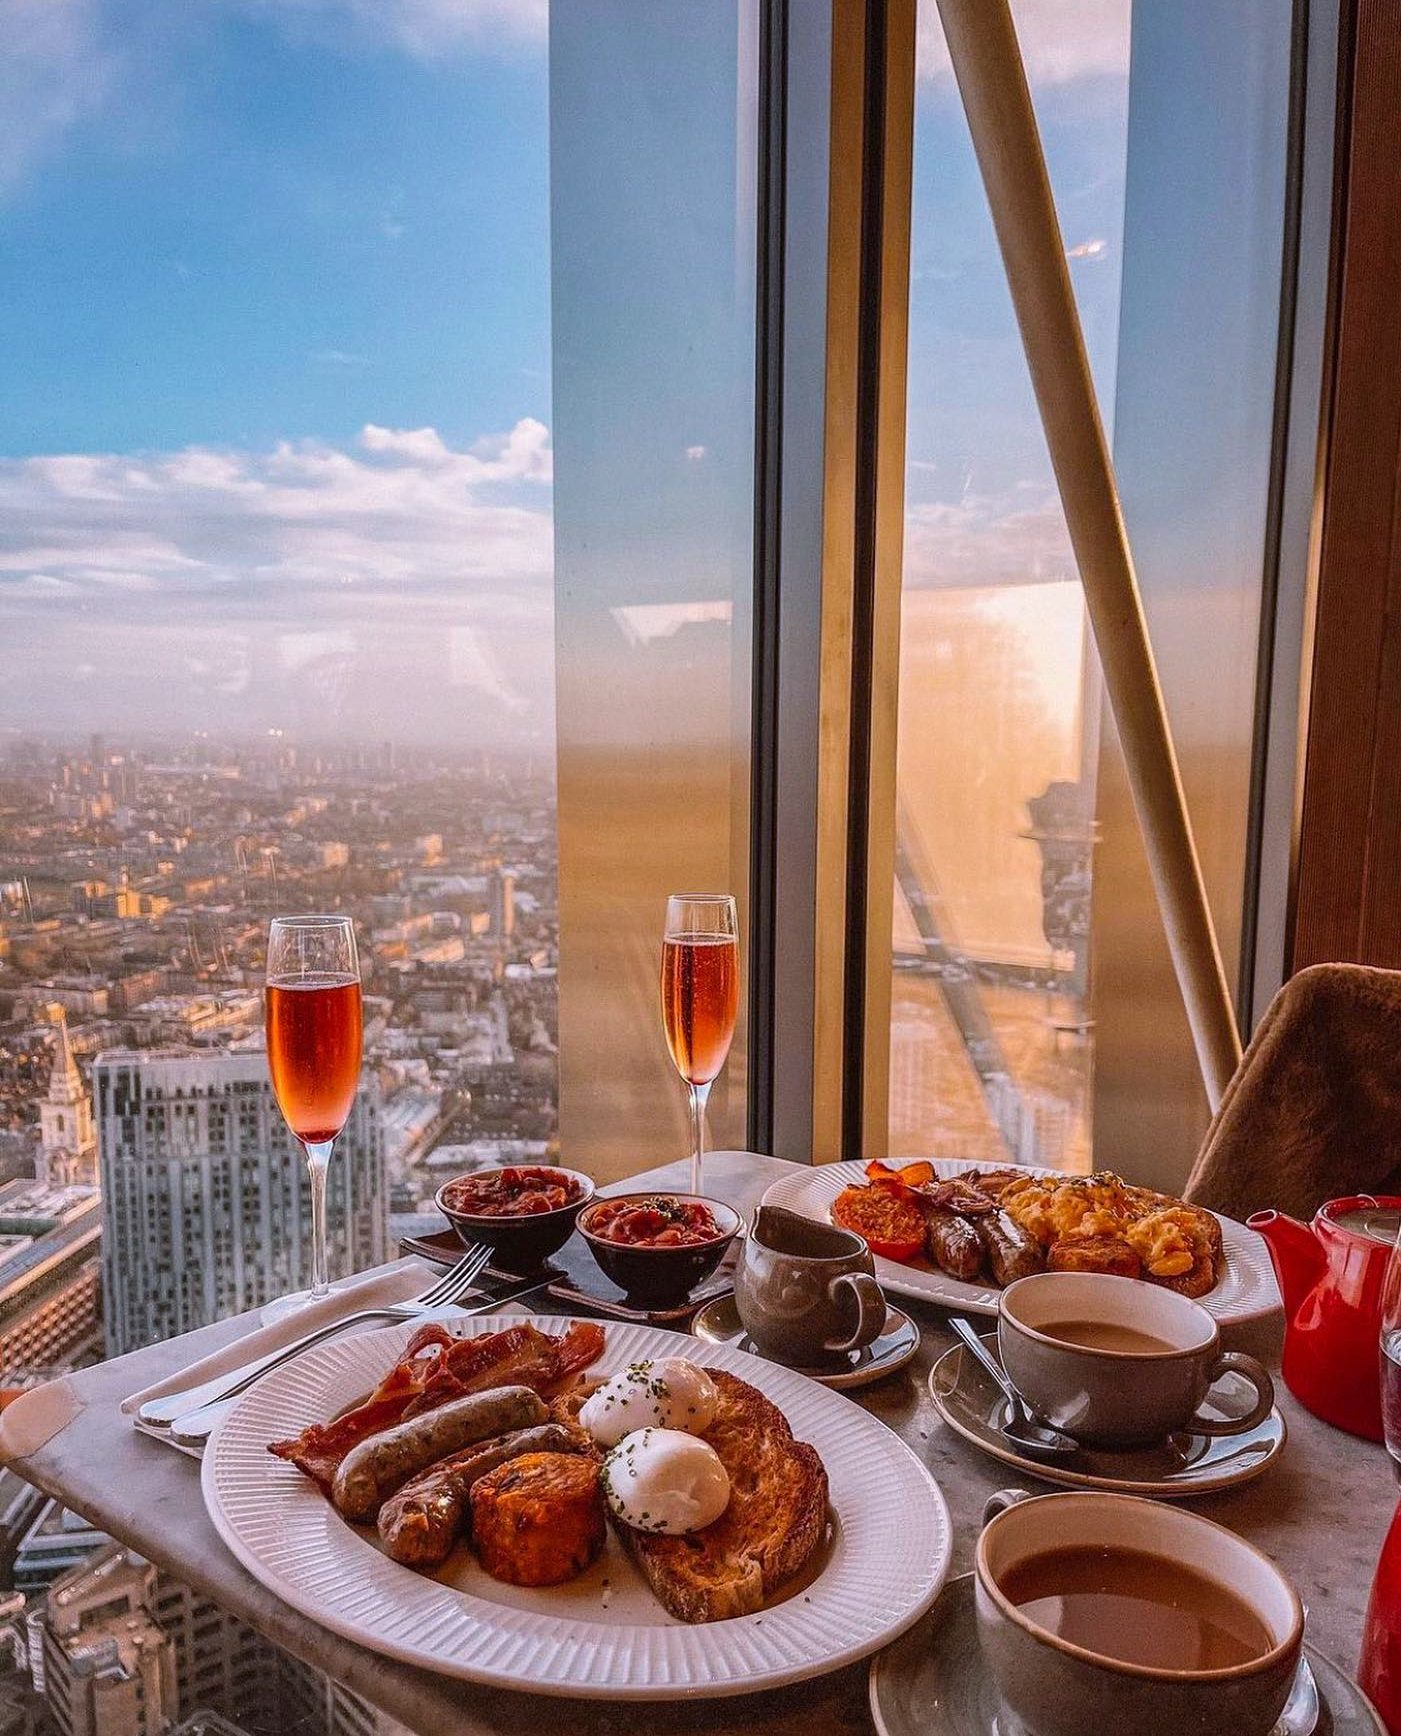 Warm sunset views - The ultimate dinner experience at at Duck & Waffle - Warm and Cozy Restaurants in London